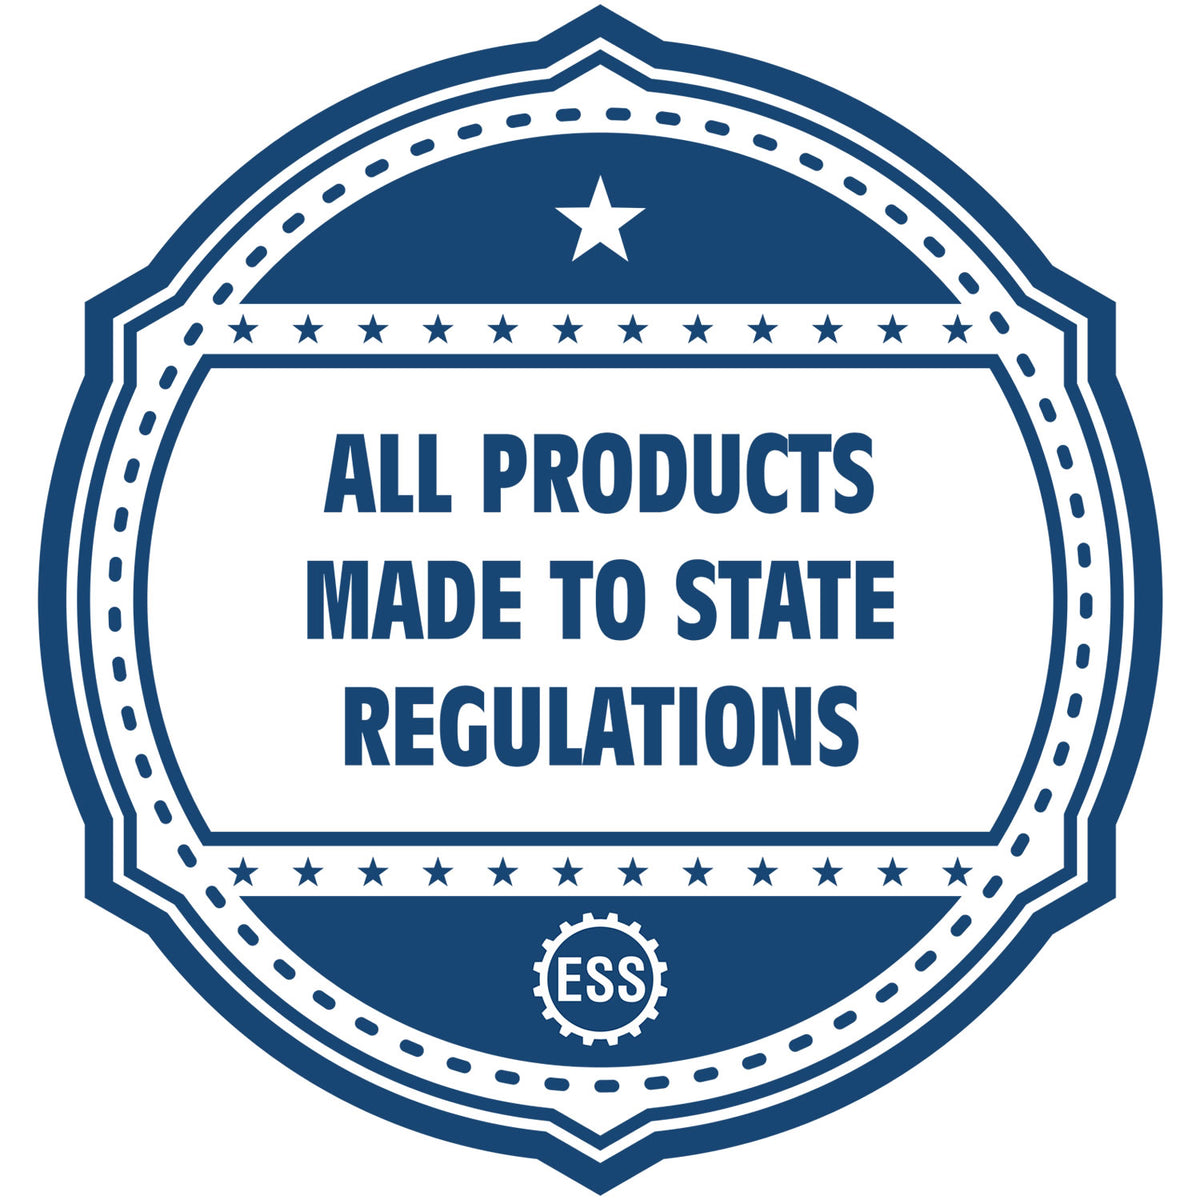 An icon or badge element for the New Jersey Engineer Desk Seal showing that this product is made in compliance with state regulations.